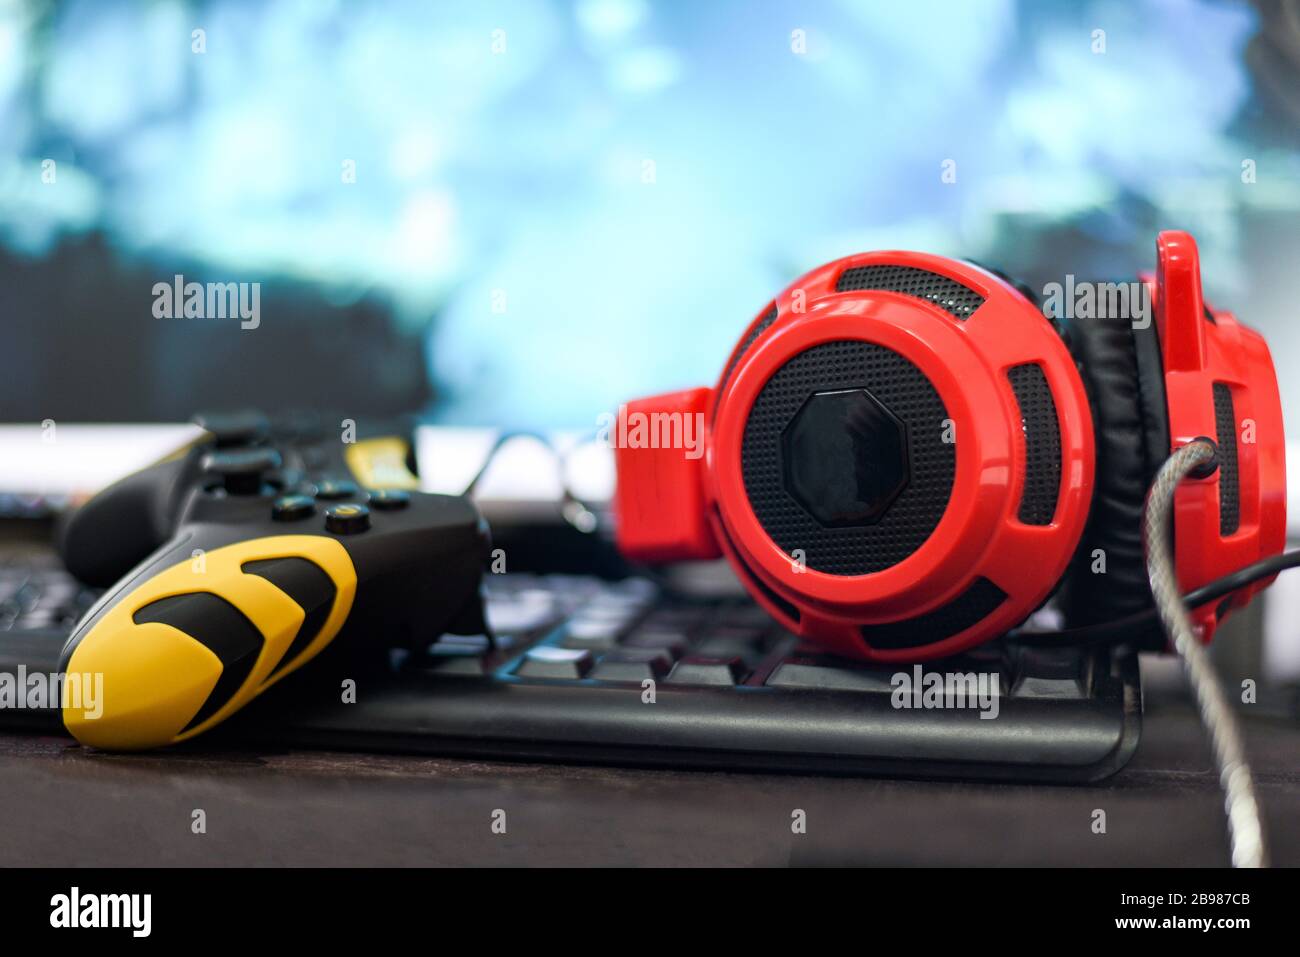 Game pad joystick and Headphones on keyboard playing gaming and watching video on tv or Computer games console concept Stock Photo